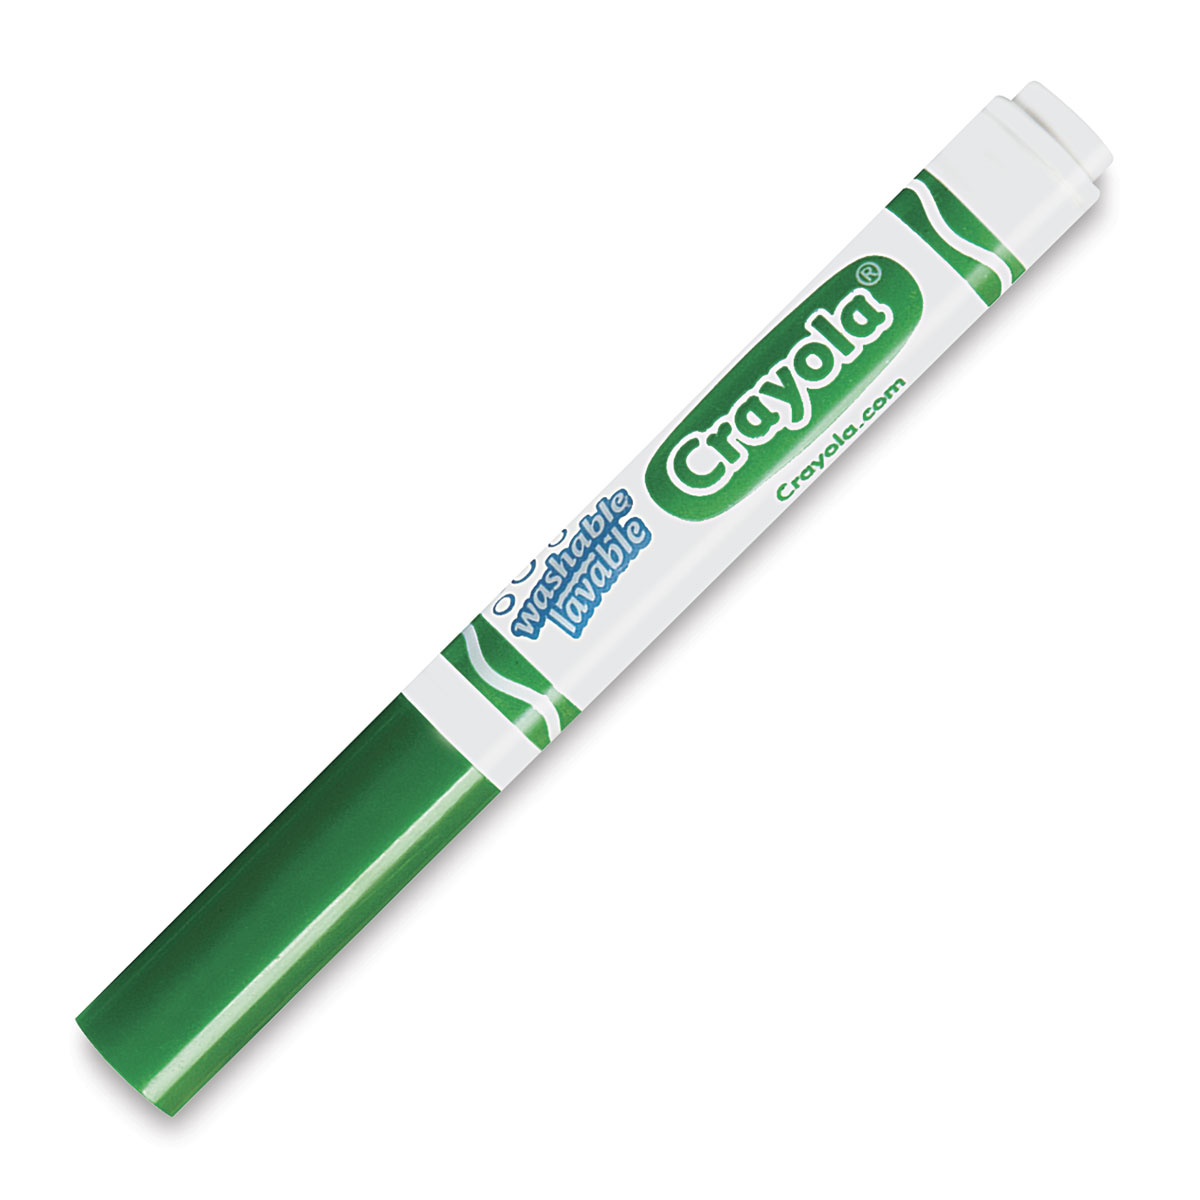 Crayola Ultra-Clean Washable Marker - Green, Broad Tip